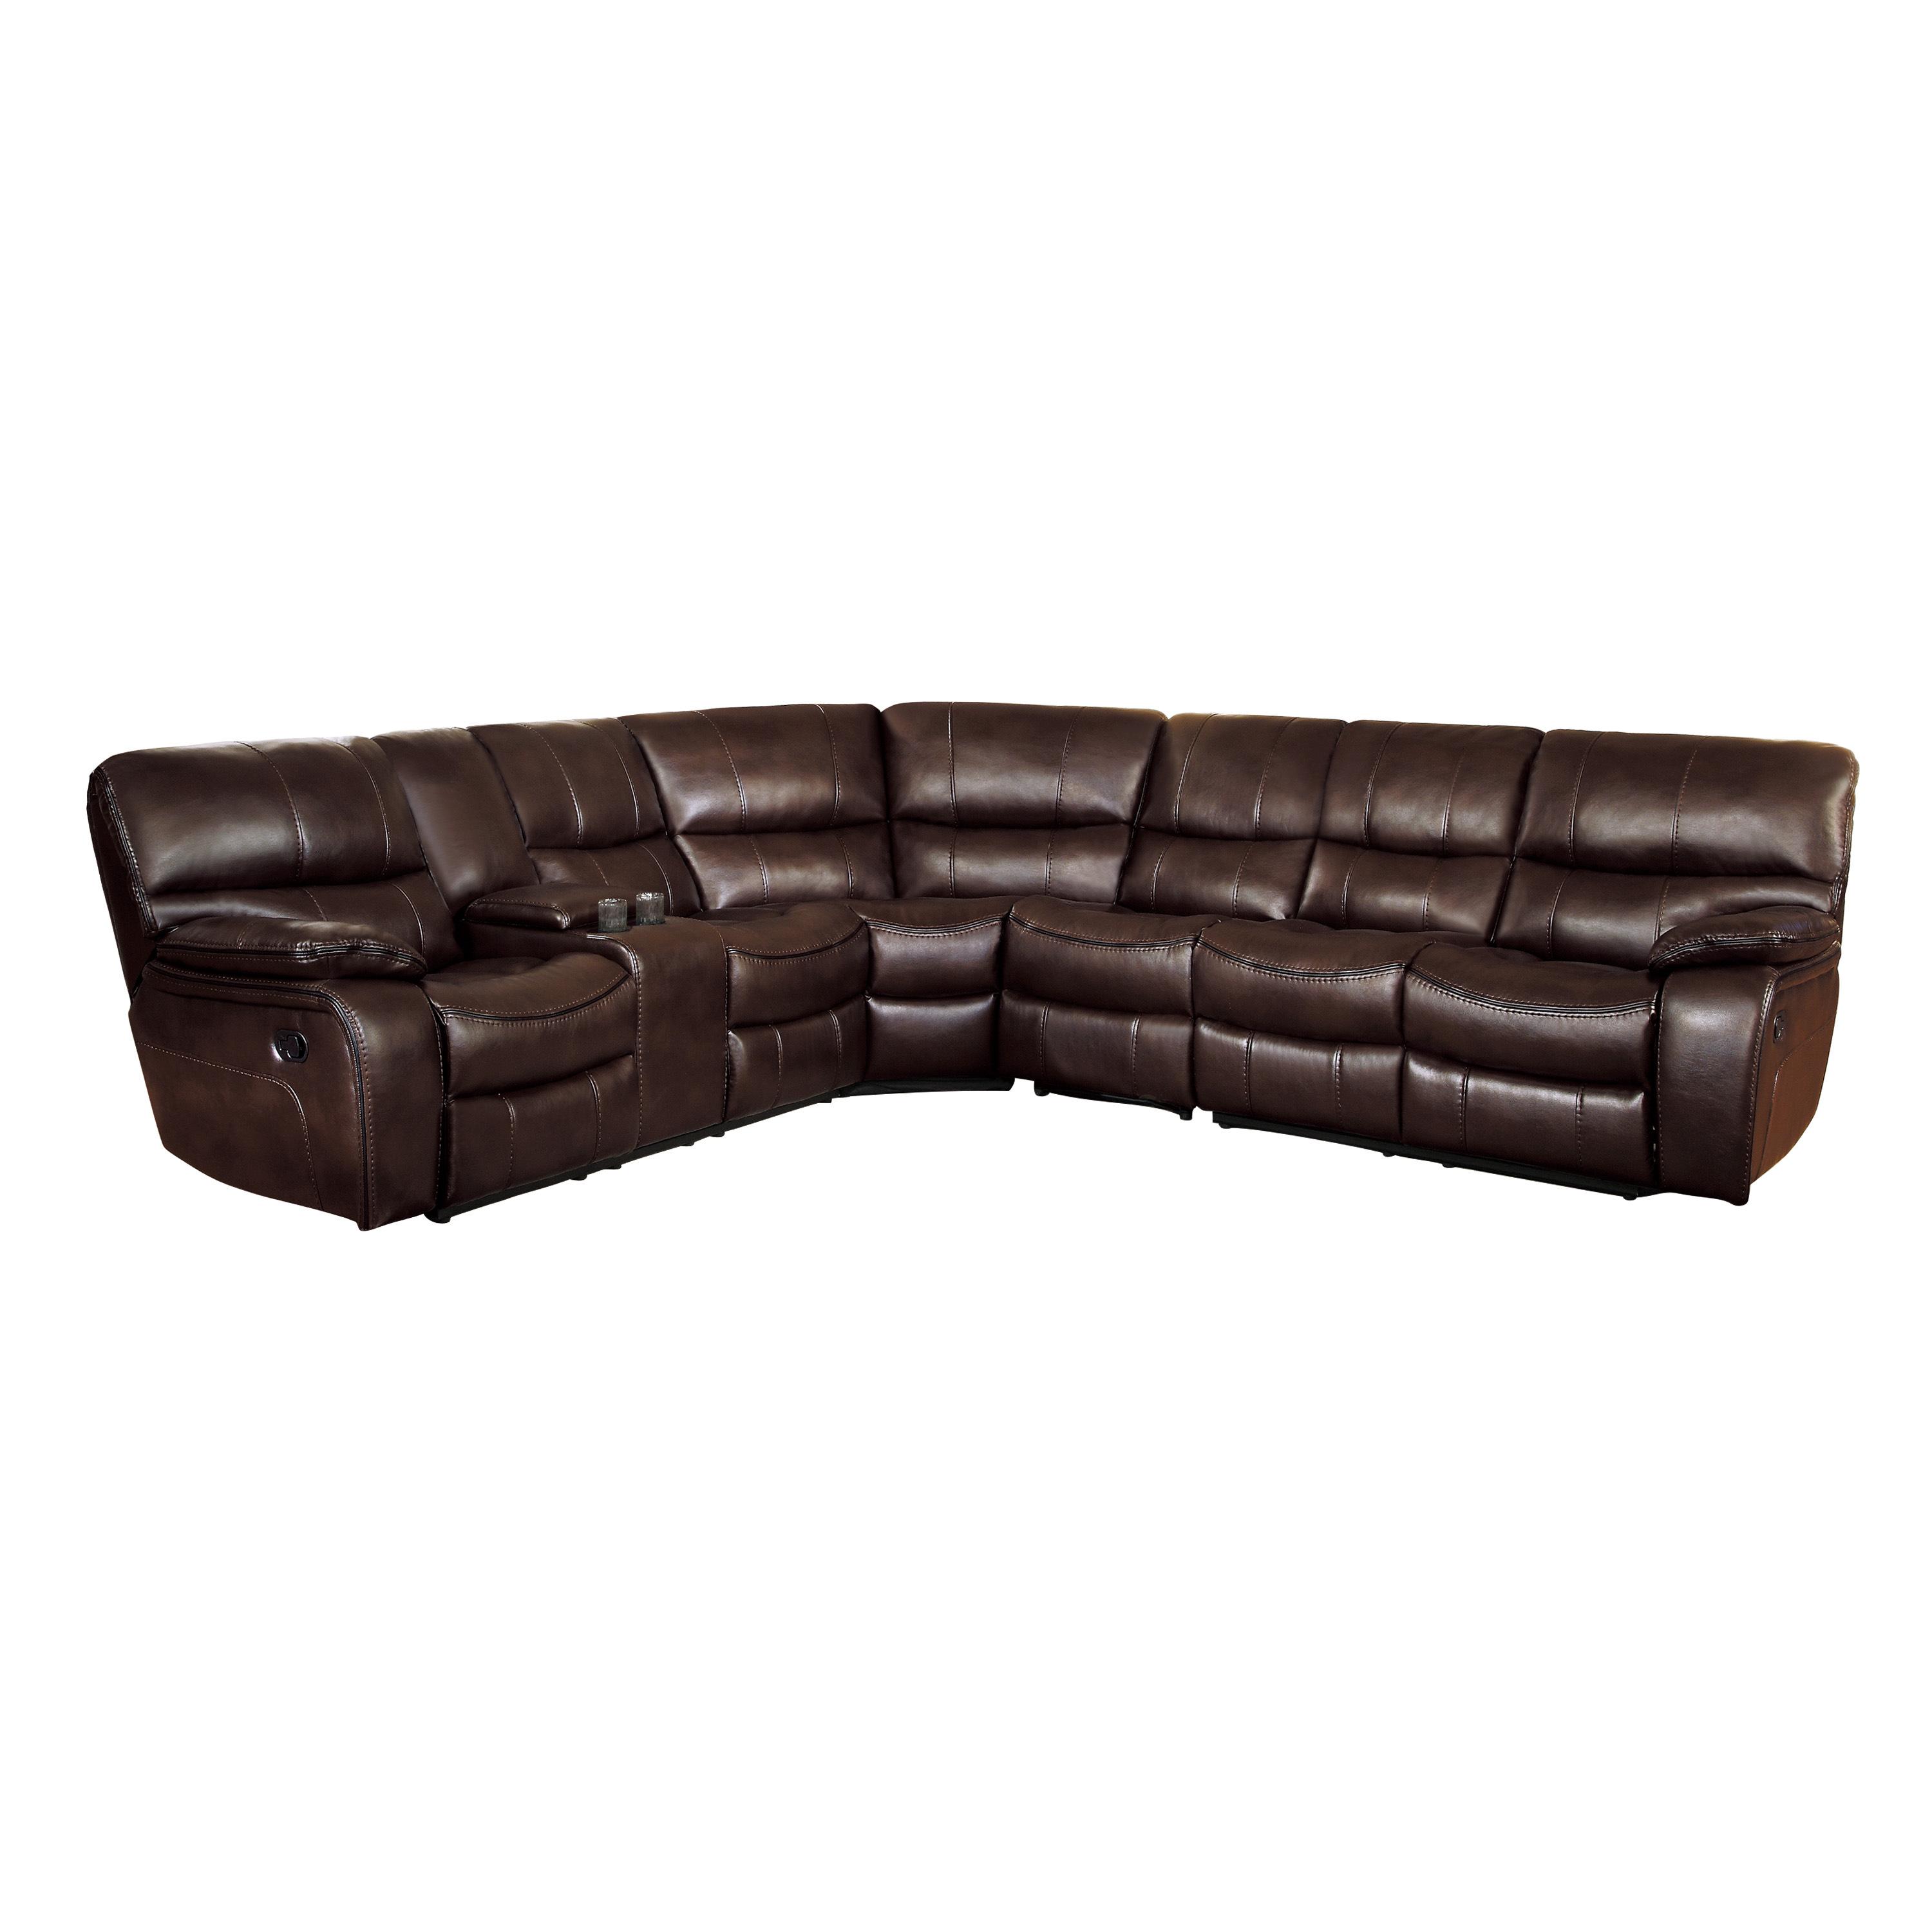 

    
Modern Dark Brown Faux Leather 4-Piece Reclining Sectional Homelegance 8480BRW*4SC Pecos
